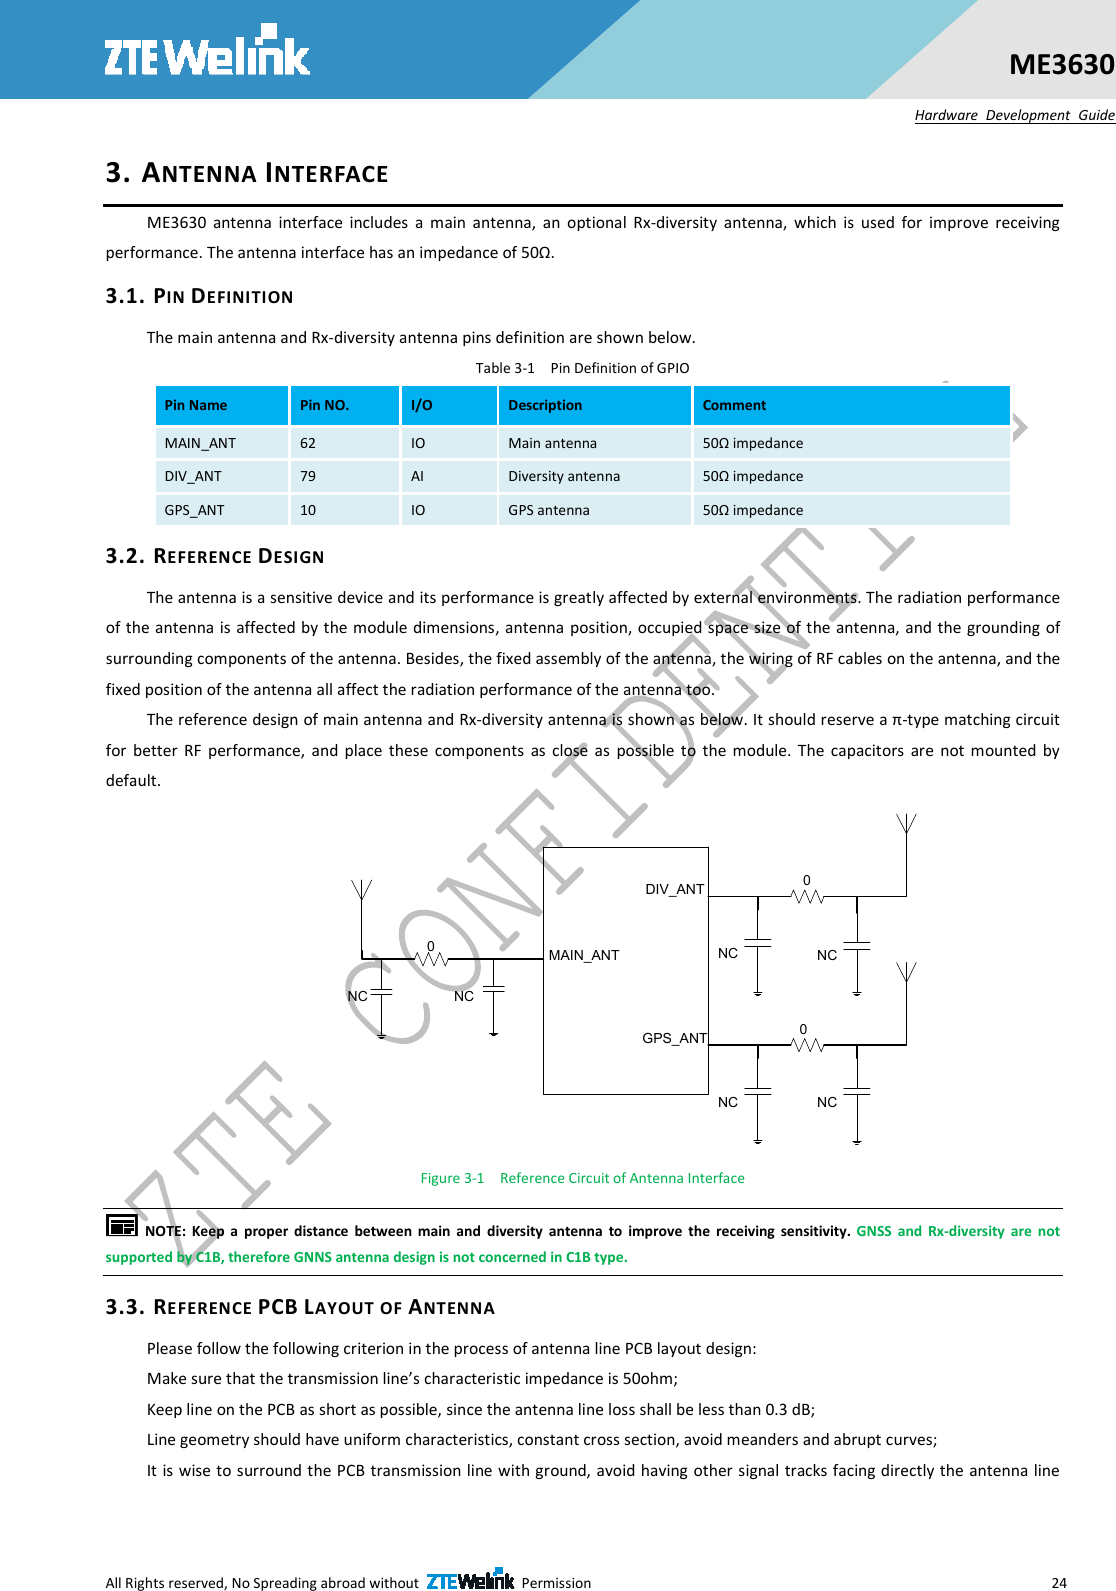  All Rights reserved, No Spreading abroad without    Permission      24 ME3630 Hardware  Development  Guide 3. ANTENNA INTERFACE ME3630  antenna  interface  includes  a  main  antenna,  an  optional  Rx-diversity  antenna,  which  is  used  for  improve  receiving performance. The antenna interface has an impedance of 50Ω. 3.1. PIN DEFINITION The main antenna and Rx-diversity antenna pins definition are shown below. Table 3-1    Pin Definition of GPIO Pin Name  Pin NO.  I/O  Description  Comment MAIN_ANT  62  IO  Main antenna  50Ω impedance DIV_ANT  79  AI  Diversity antenna  50Ω impedance GPS_ANT  10  IO  GPS antenna  50Ω impedance 3.2. REFERENCE DESIGN The antenna is a sensitive device and its performance is greatly affected by external environments. The radiation performance of the antenna is affected by the module dimensions, antenna position, occupied space size of the antenna, and the grounding  of surrounding components of the antenna. Besides, the fixed assembly of the antenna, the wiring of RF cables on the antenna, and the fixed position of the antenna all affect the radiation performance of the antenna too. The reference design of main antenna and Rx-diversity antenna is shown as below. It should reserve a π-type matching circuit for  better  RF  performance,  and  place  these  components  as  close  as  possible  to  the  module.  The  capacitors  are  not  mounted  by default.   MAIN_ANTDIV_ANTGPS_ANT000NCNCNCNCNCNC Figure 3-1    Reference Circuit of Antenna Interface     NOTE:  Keep  a  proper  distance  between  main  and  diversity  antenna  to  improve  the  receiving  sensitivity. GNSS  and  Rx-diversity  are  not supported by C1B, therefore GNNS antenna design is not concerned in C1B type. 3.3. REFERENCE PCB LAYOUT OF ANTENNA Please follow the following criterion in the process of antenna line PCB layout design:   Make sure that the transmission line’s characteristic impedance is 50ohm; Keep line on the PCB as short as possible, since the antenna line loss shall be less than 0.3 dB; Line geometry should have uniform characteristics, constant cross section, avoid meanders and abrupt curves; It is wise to surround the PCB transmission line with ground, avoid having other signal tracks facing directly the antenna line 